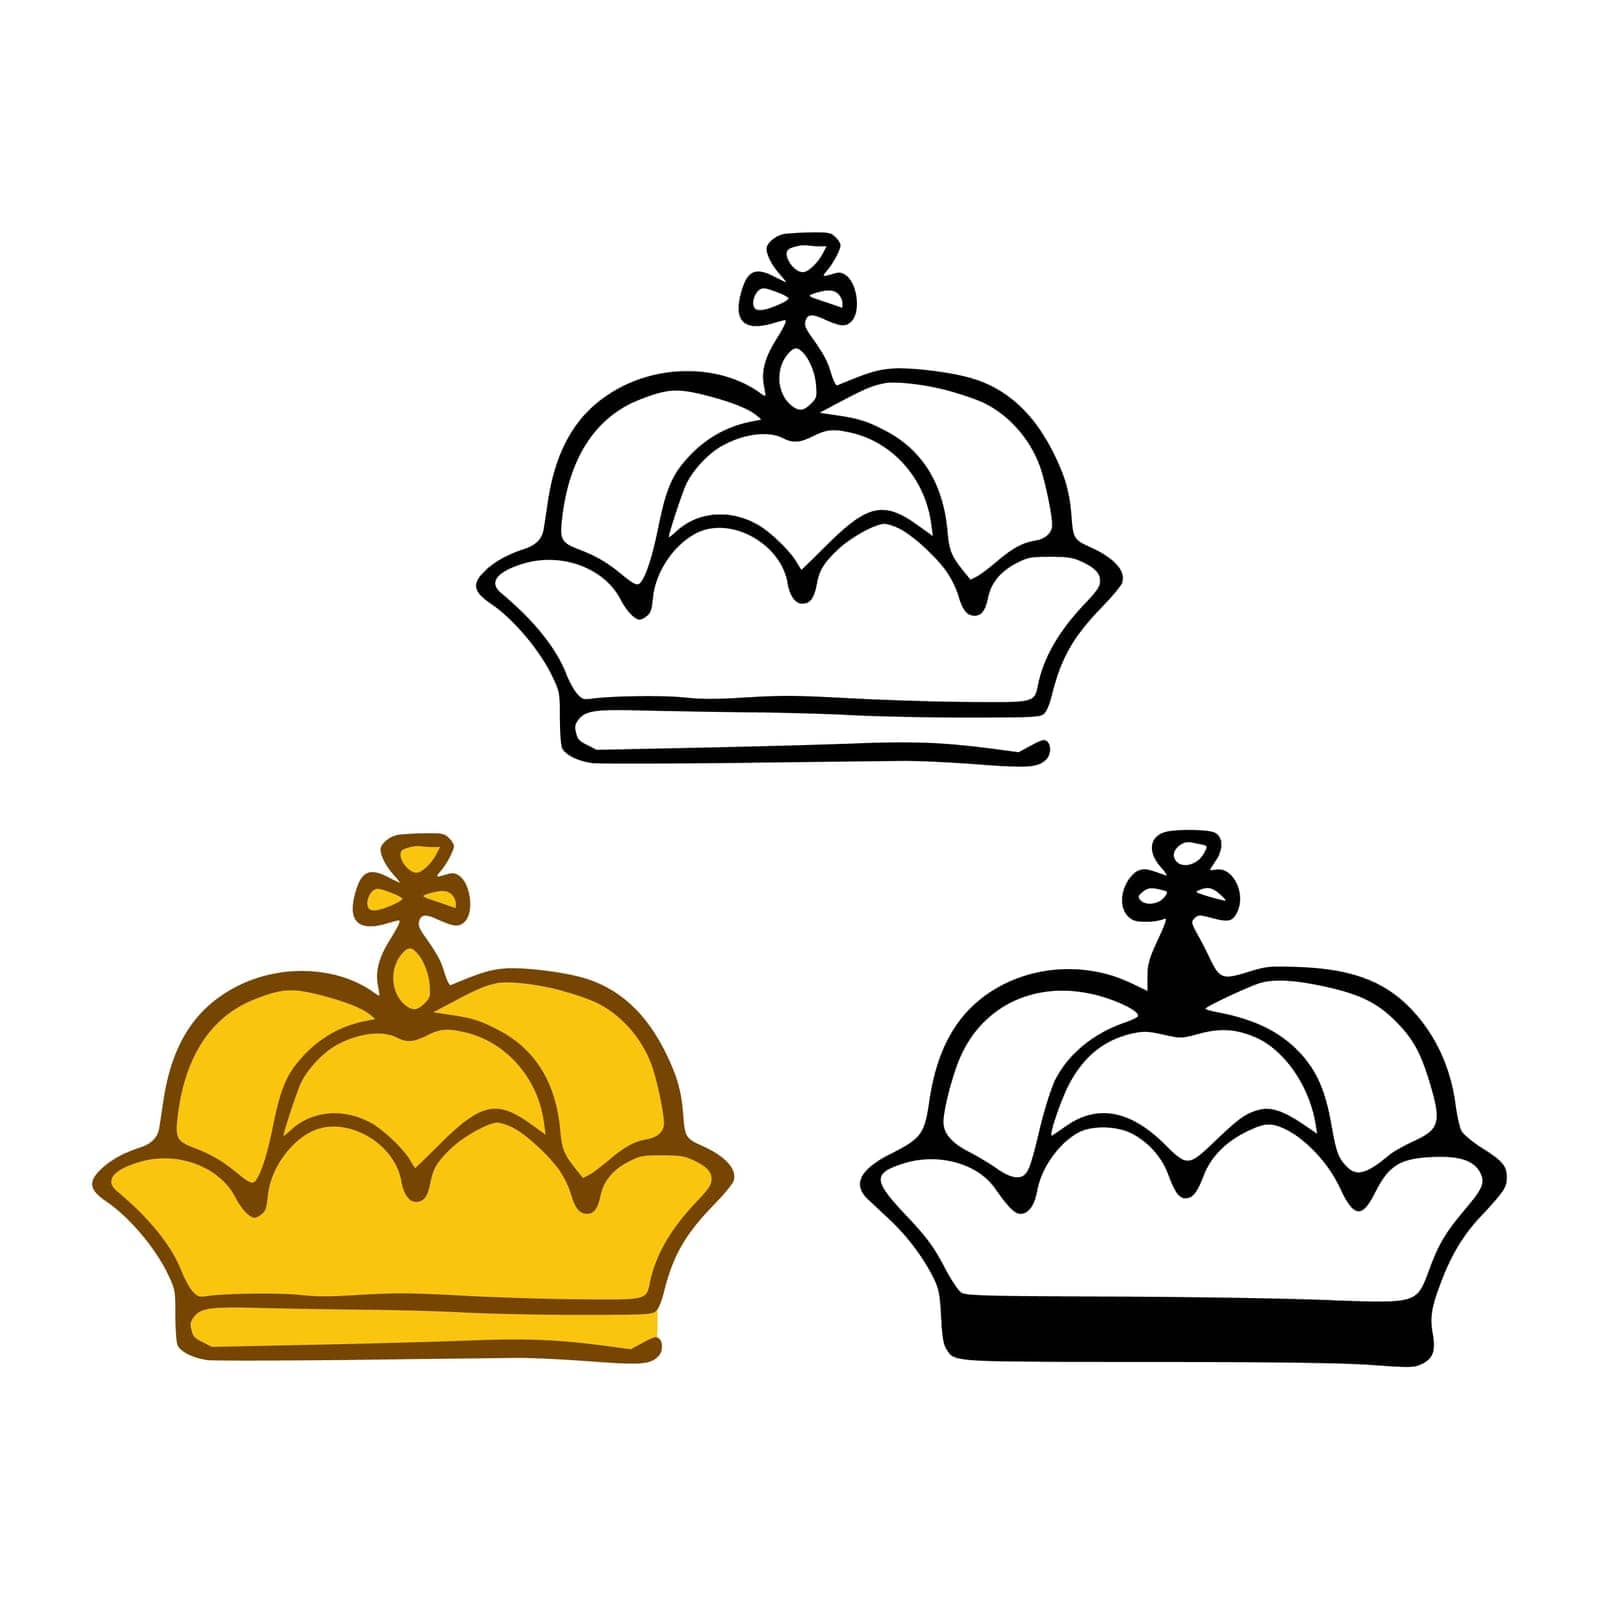 Monarch crown icon set in doodles styles isolated on white background. Royal or queen sign, authority symbol